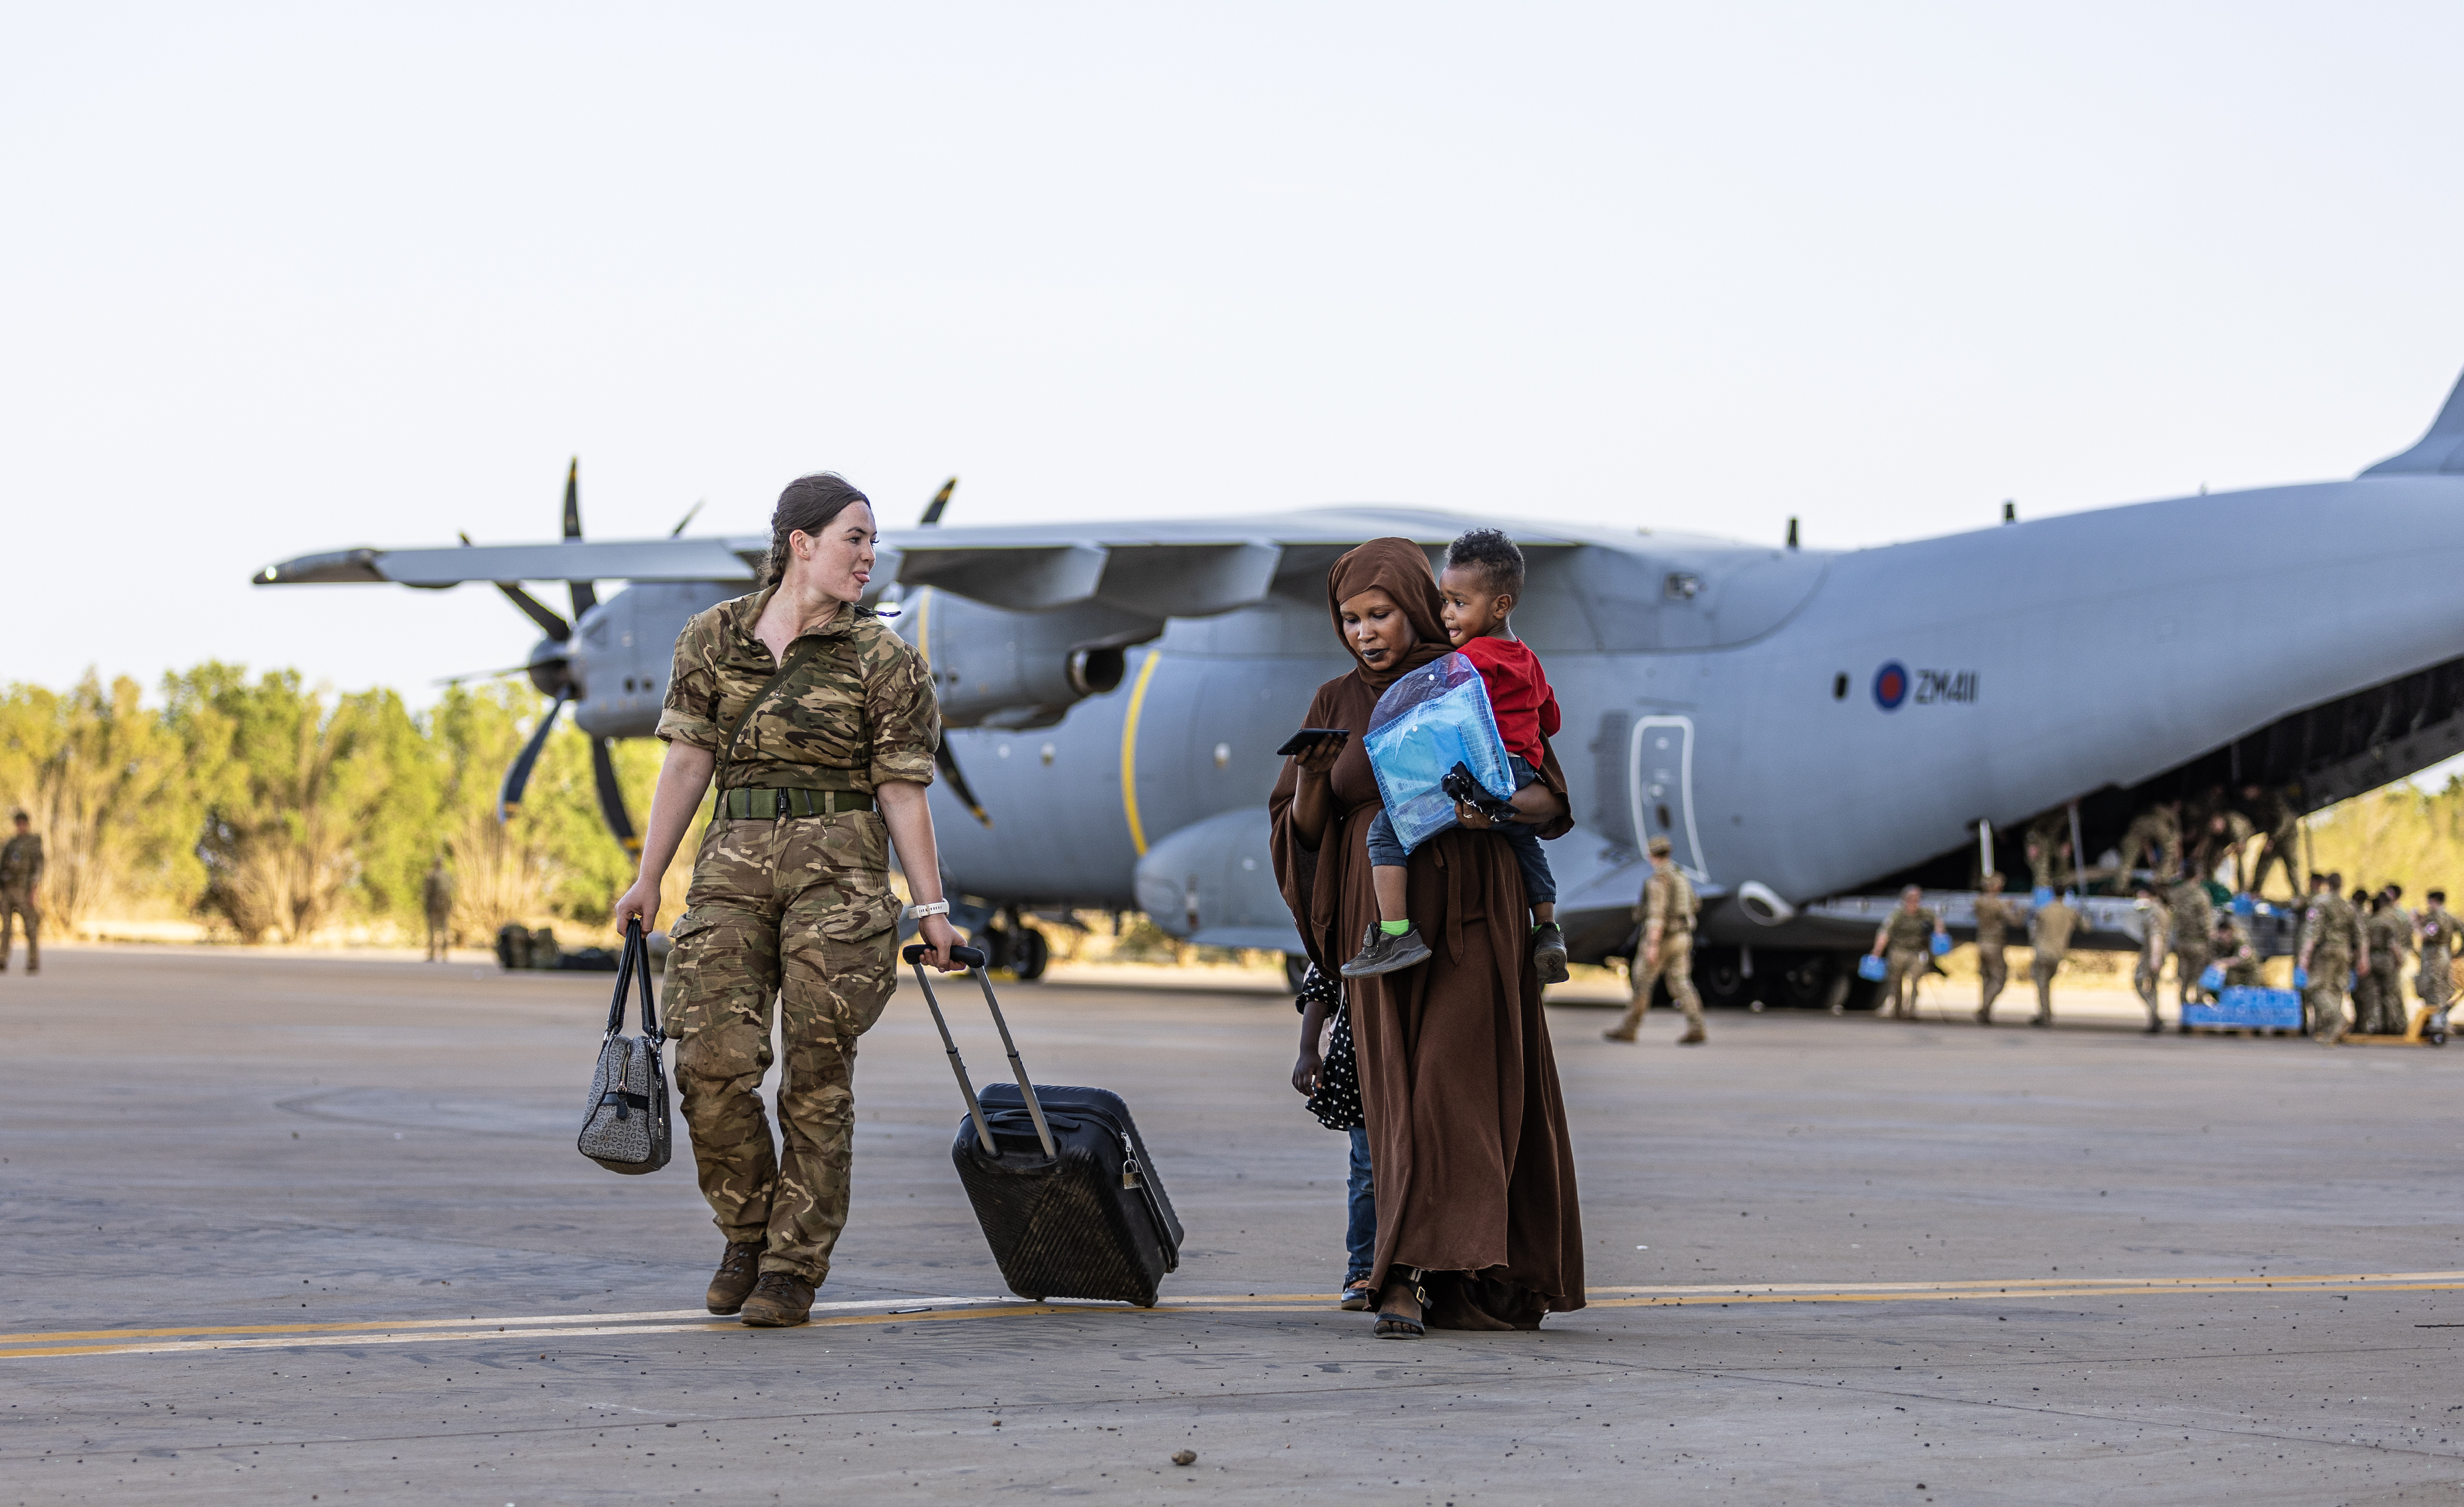 Assisting Sudan evacuees off the A400M